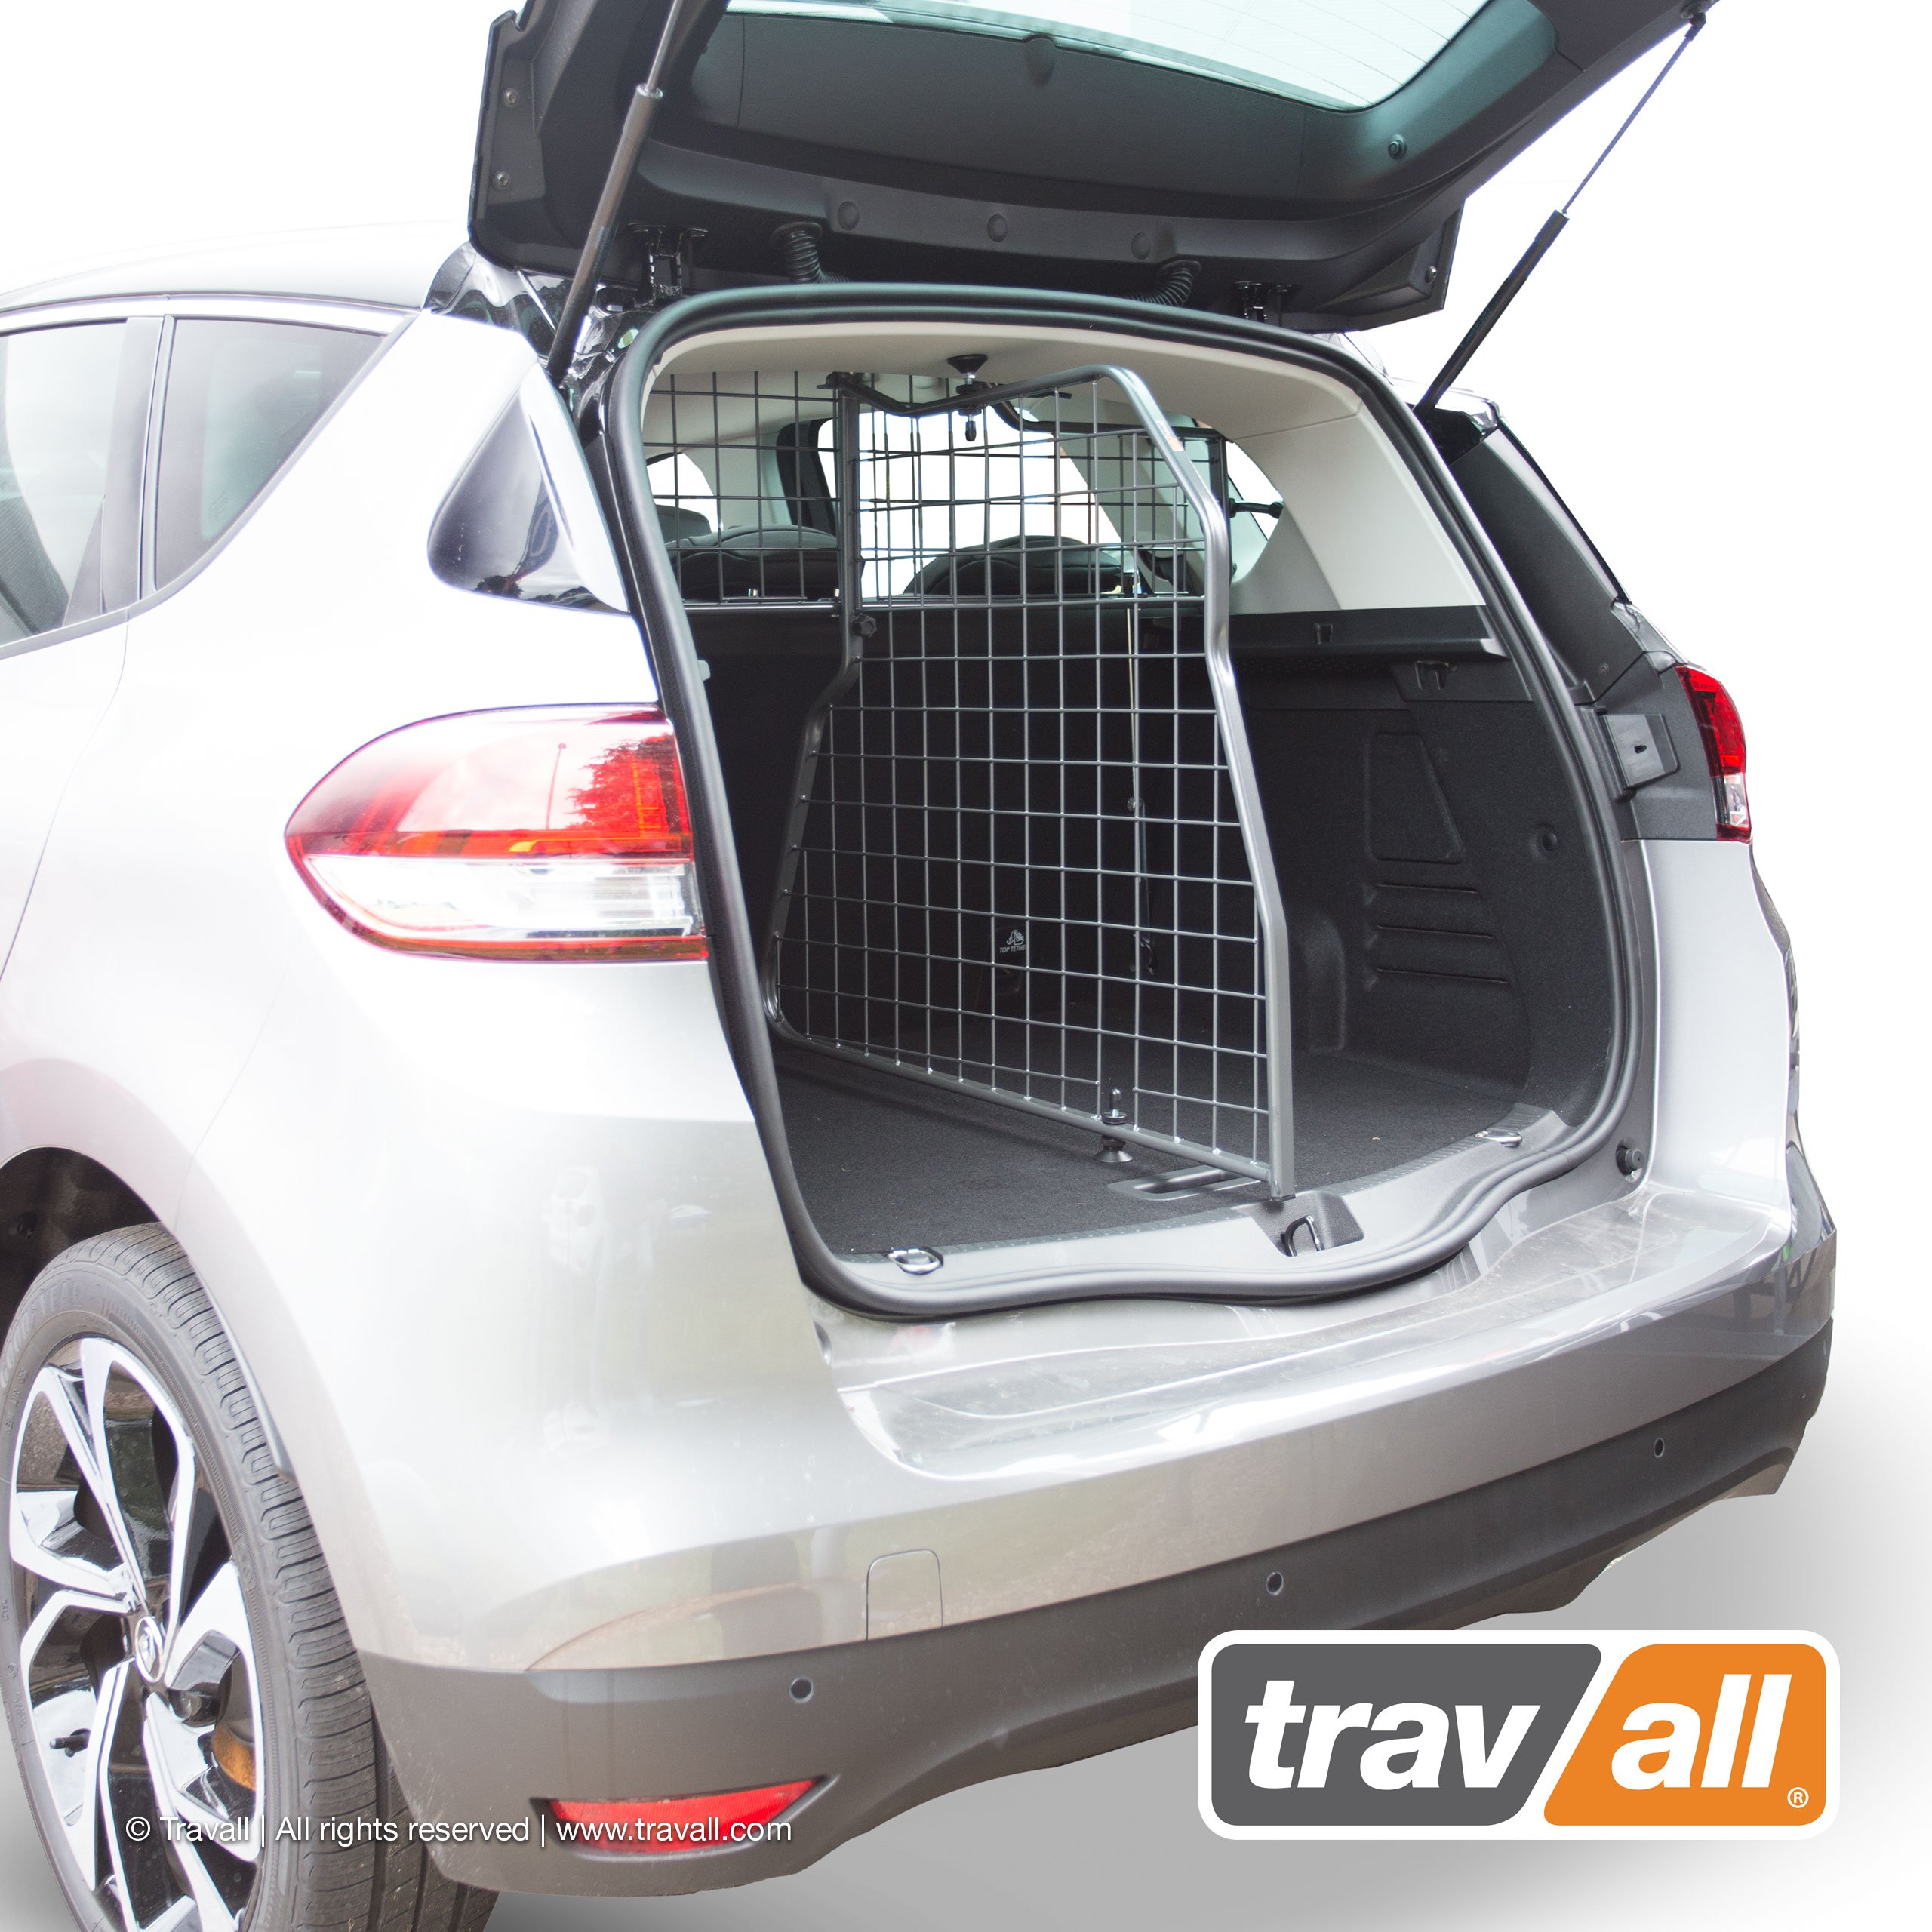 2016- Grille séparation protection chien bagages RENAULT Grand Scenic 